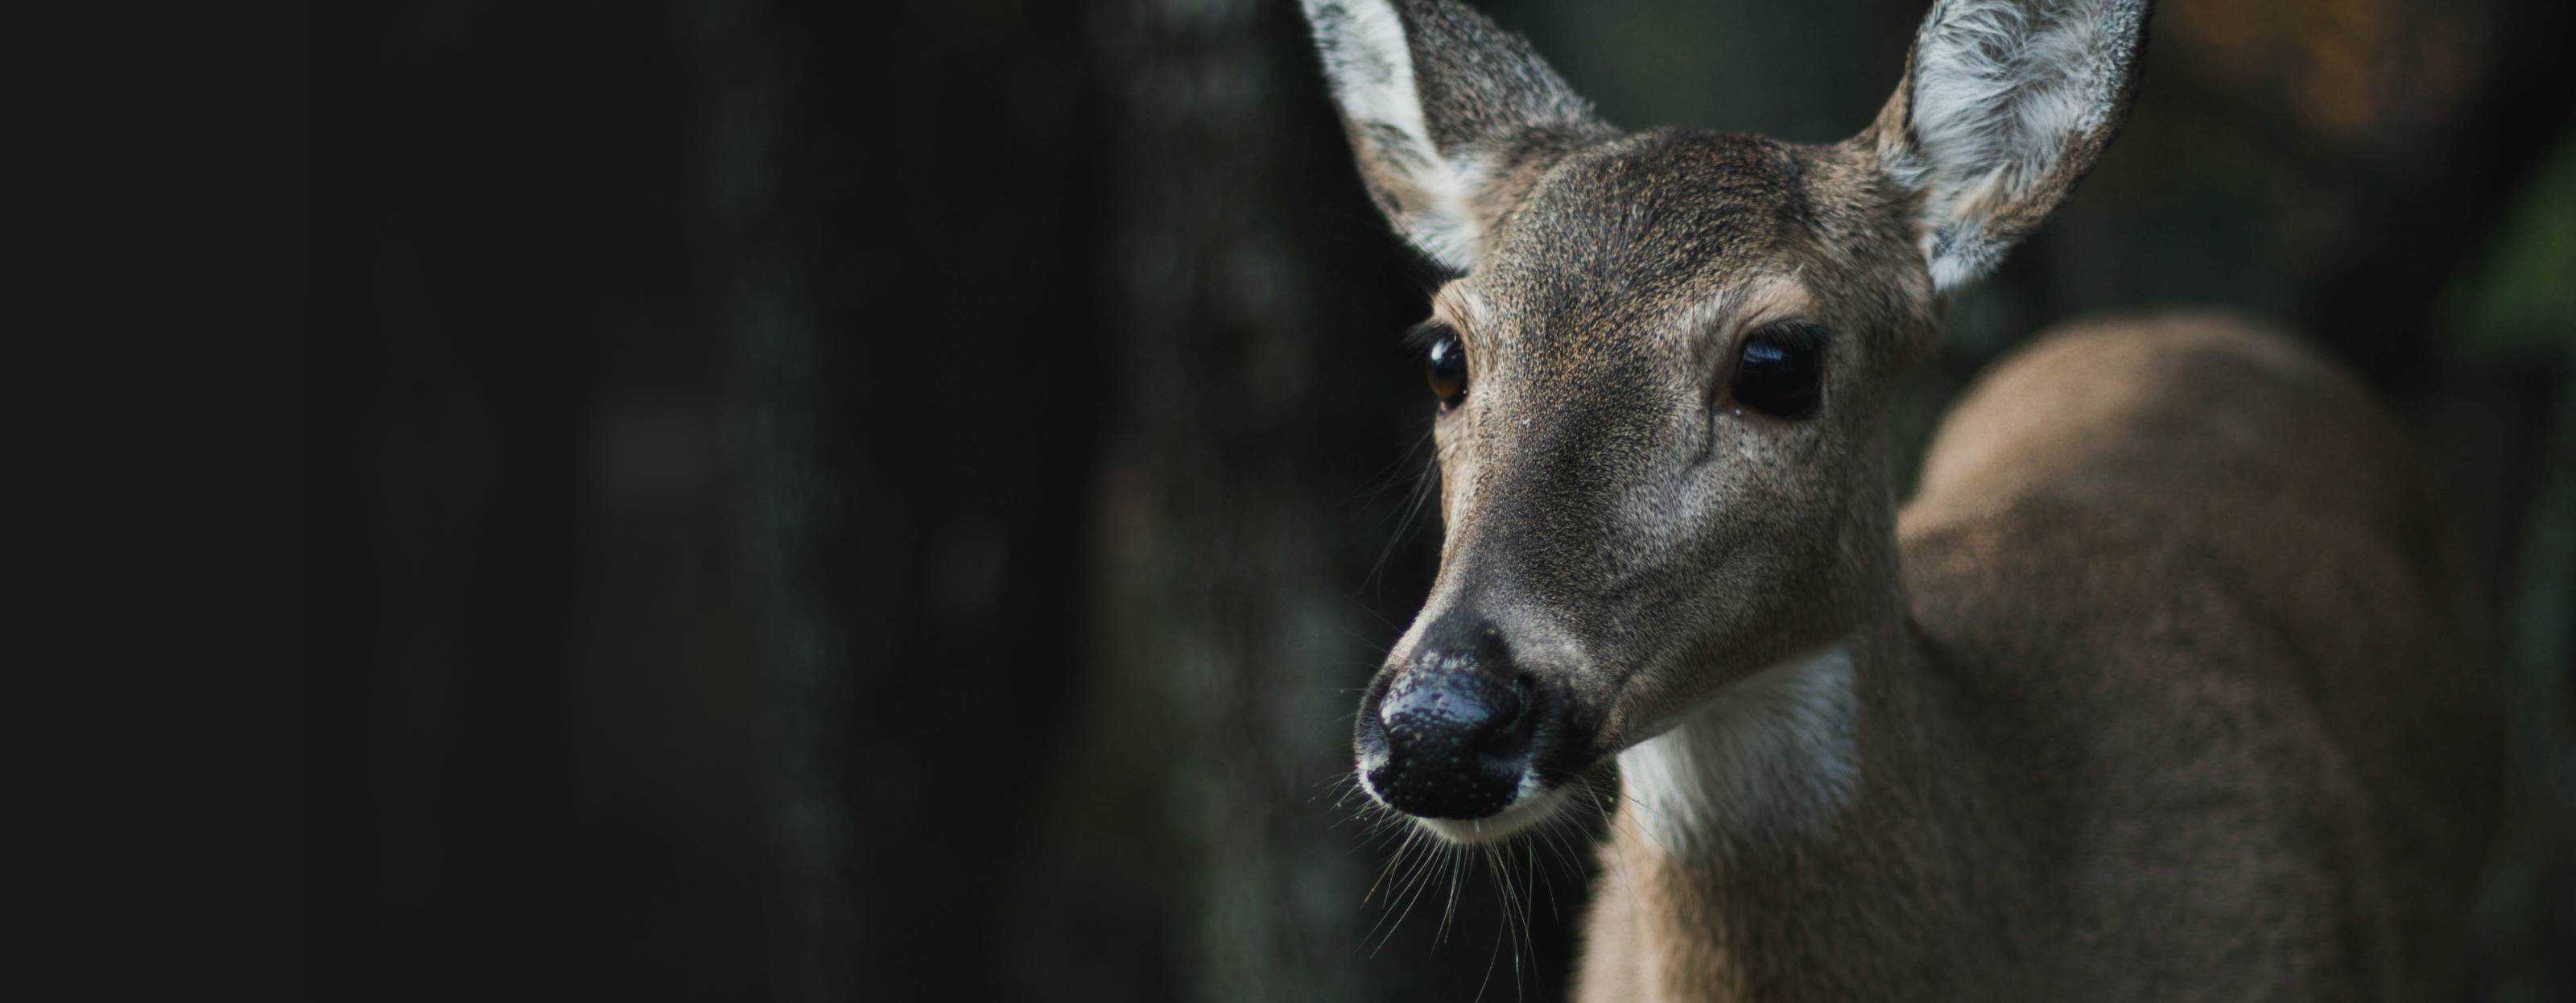 Will Another Doe Adopt an Orphaned Fawn? 